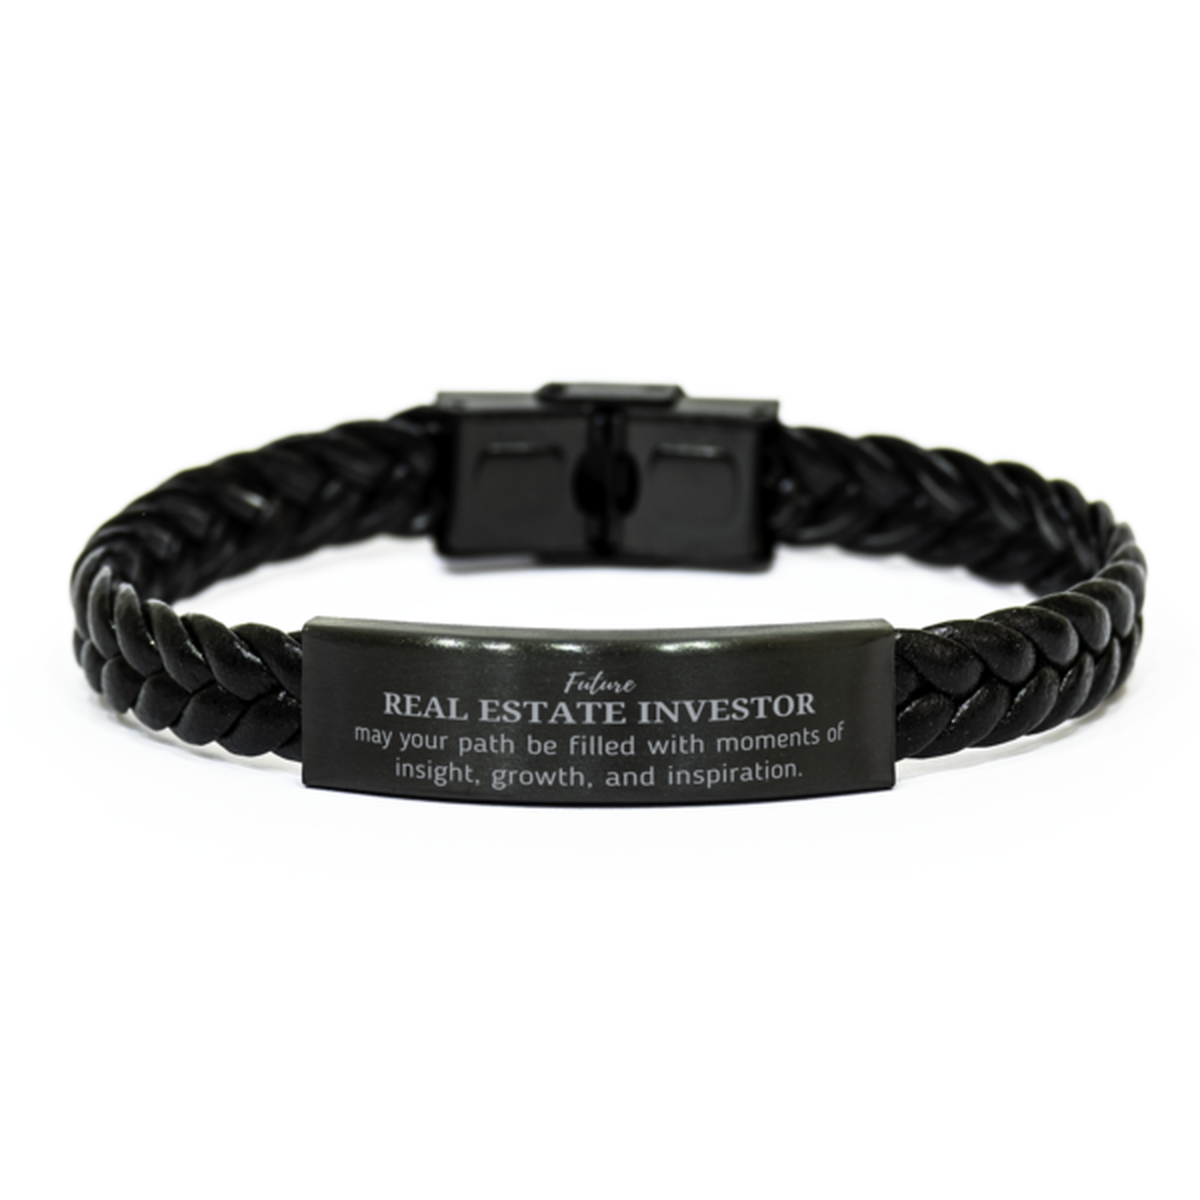 Future Real Estate Investor Gifts, May your path be filled with moments of insight, Graduation Gifts for New Real Estate Investor, Christmas Unique Braided Leather Bracelet For Men, Women, Friends